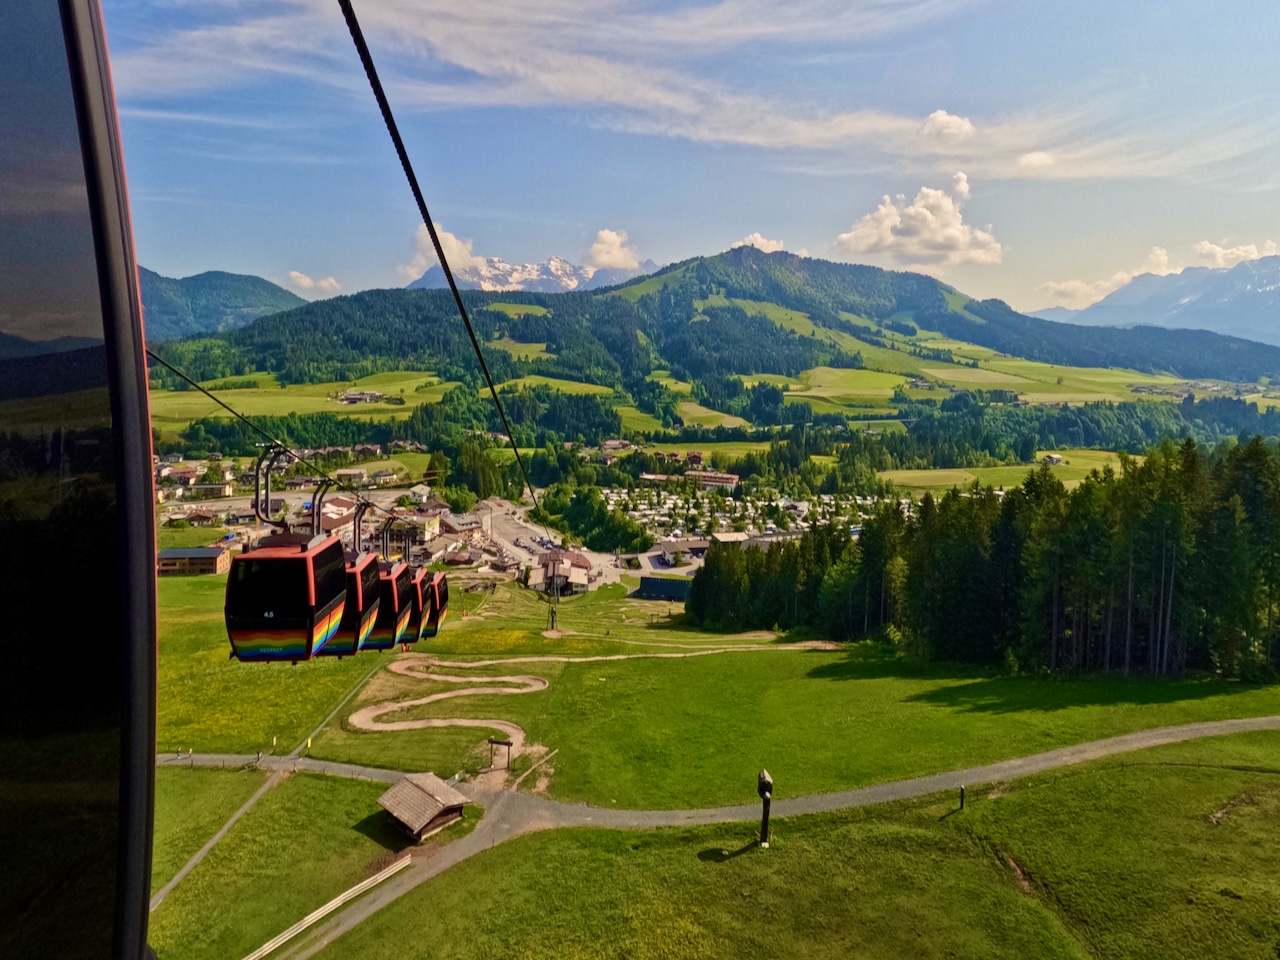 A good introduction to the activities in the Pillerseetal - the local mountain of Fieberbrunn with the Streuboden, the Lärchfilzkogel and, higher up, the Wildseeloder. Travel Report Fieberbrunn Pillerseetal experiences tips sights activities